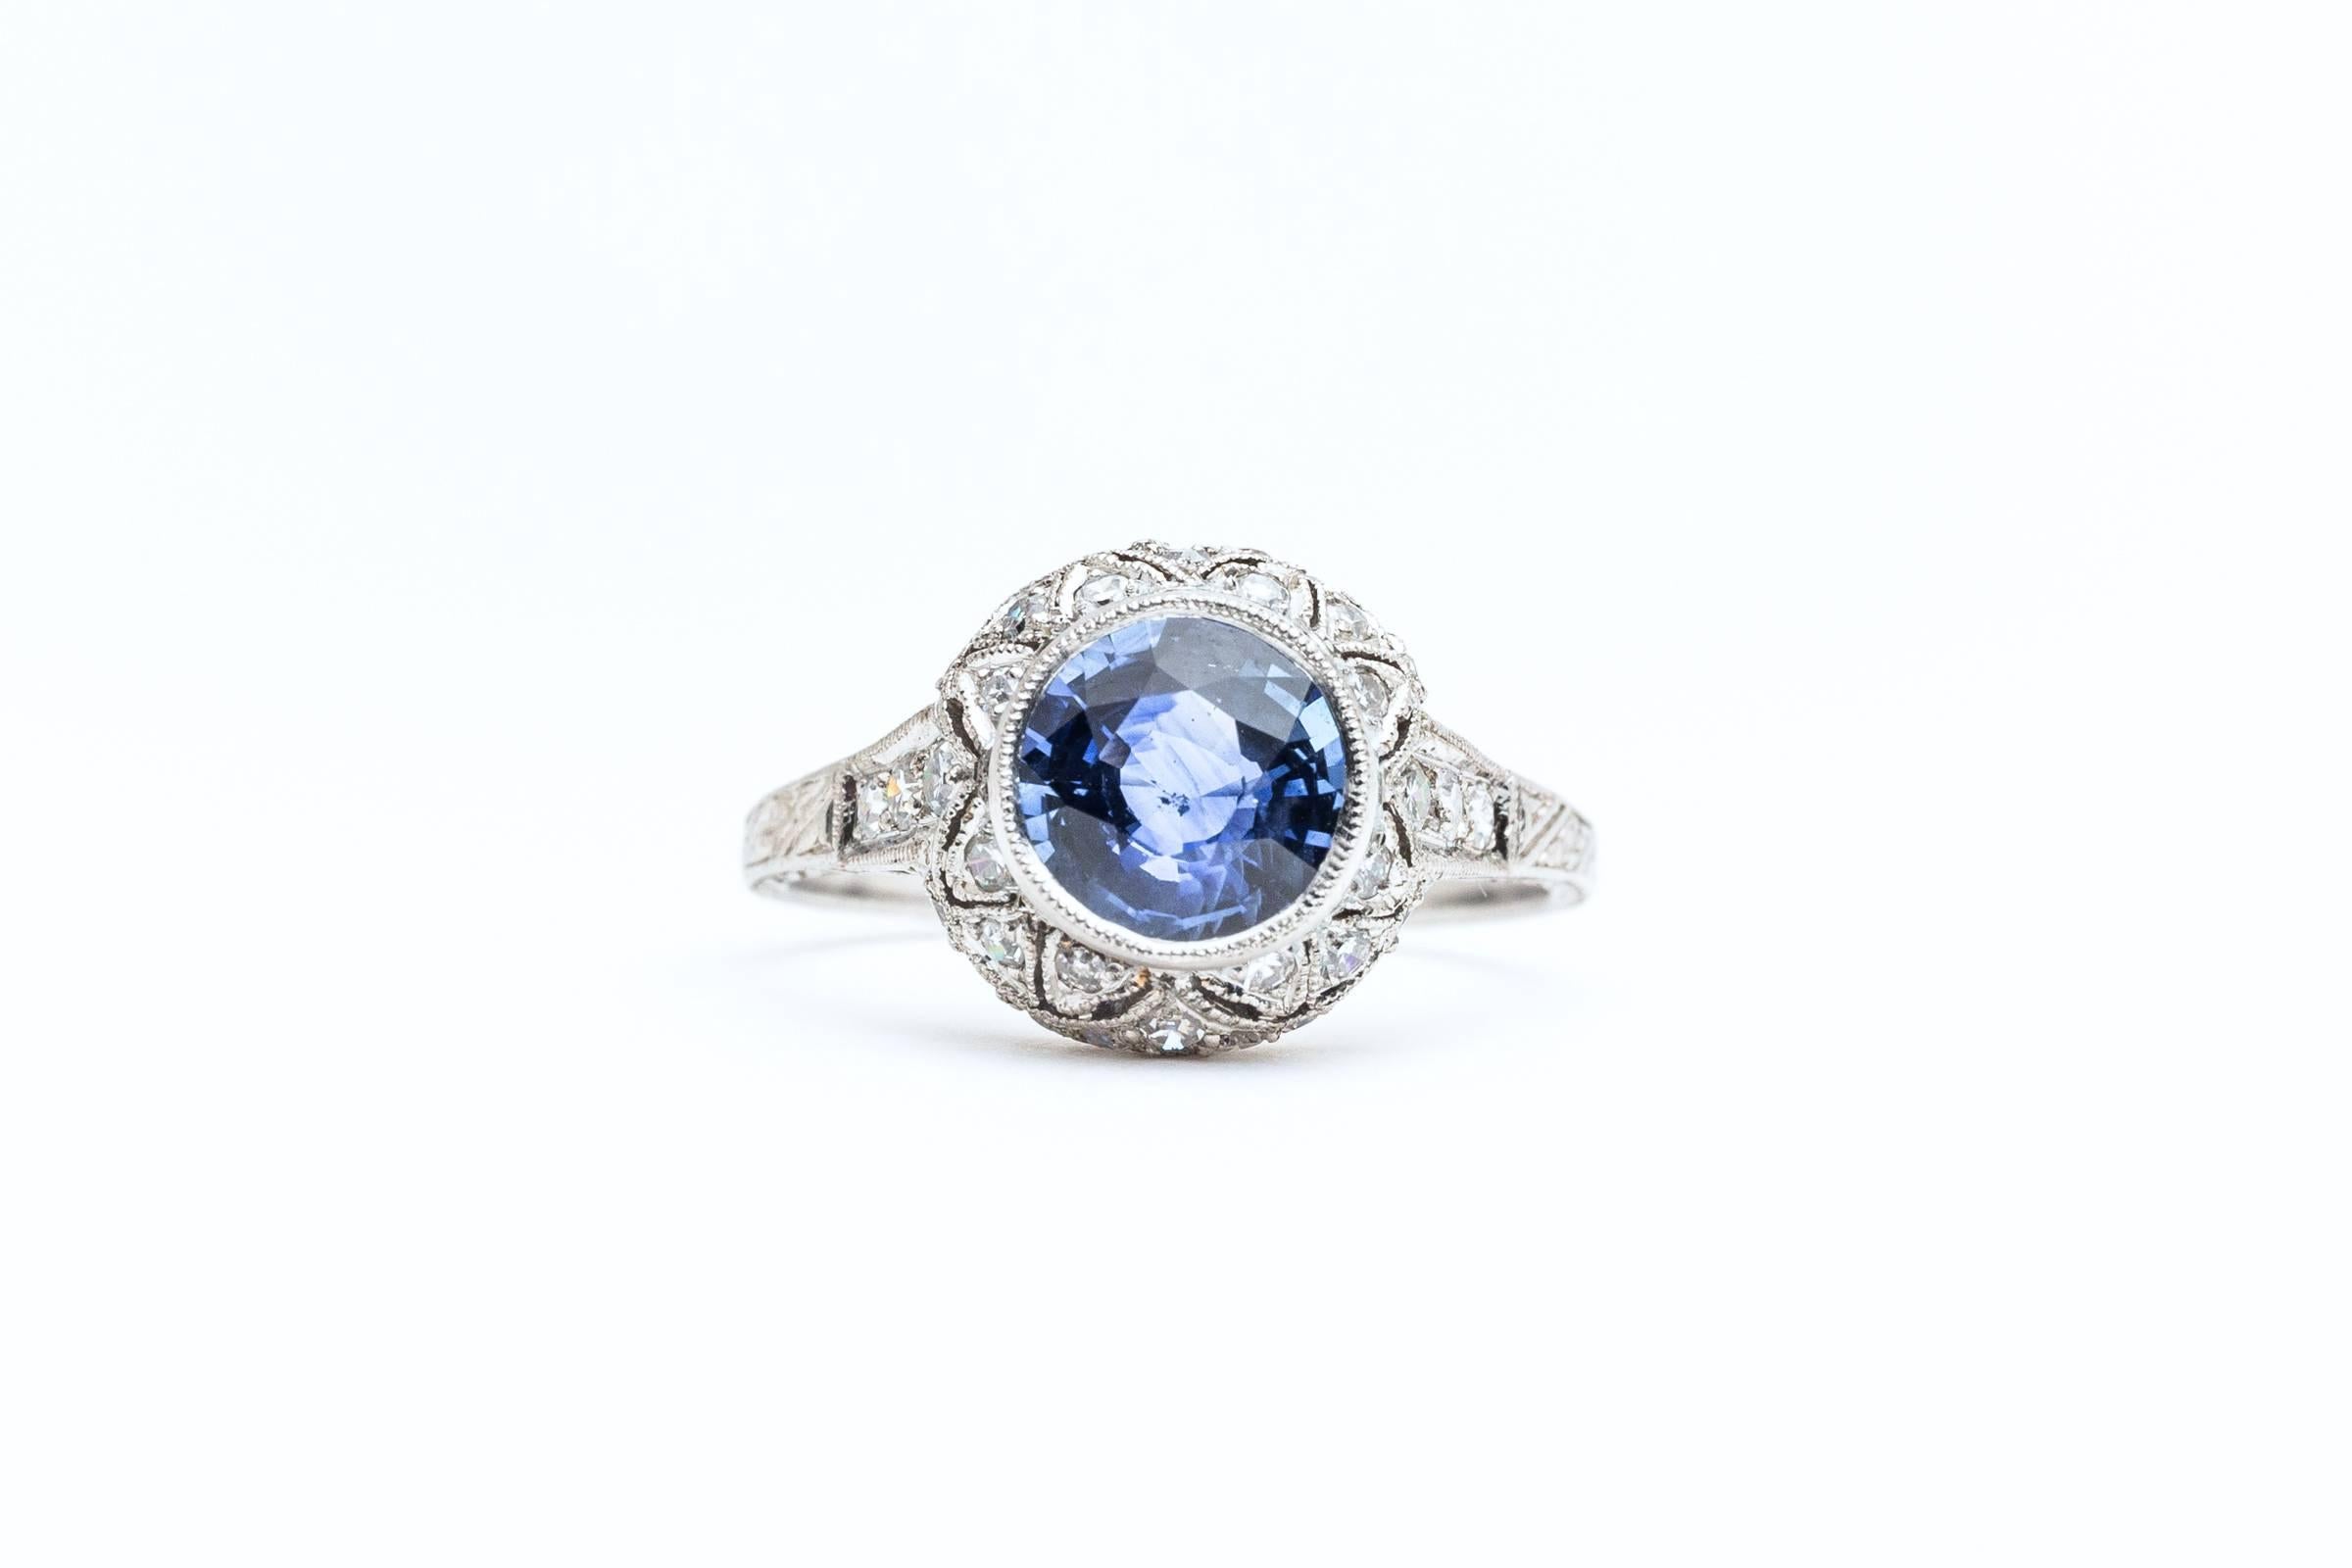 A beautiful original art deco period sapphire and diamond engagement style ring in luxurious platinum. Centered by a bezel set old European cut sapphire of exceptional quality, this ring features a total of thirty six accenting European cut diamonds